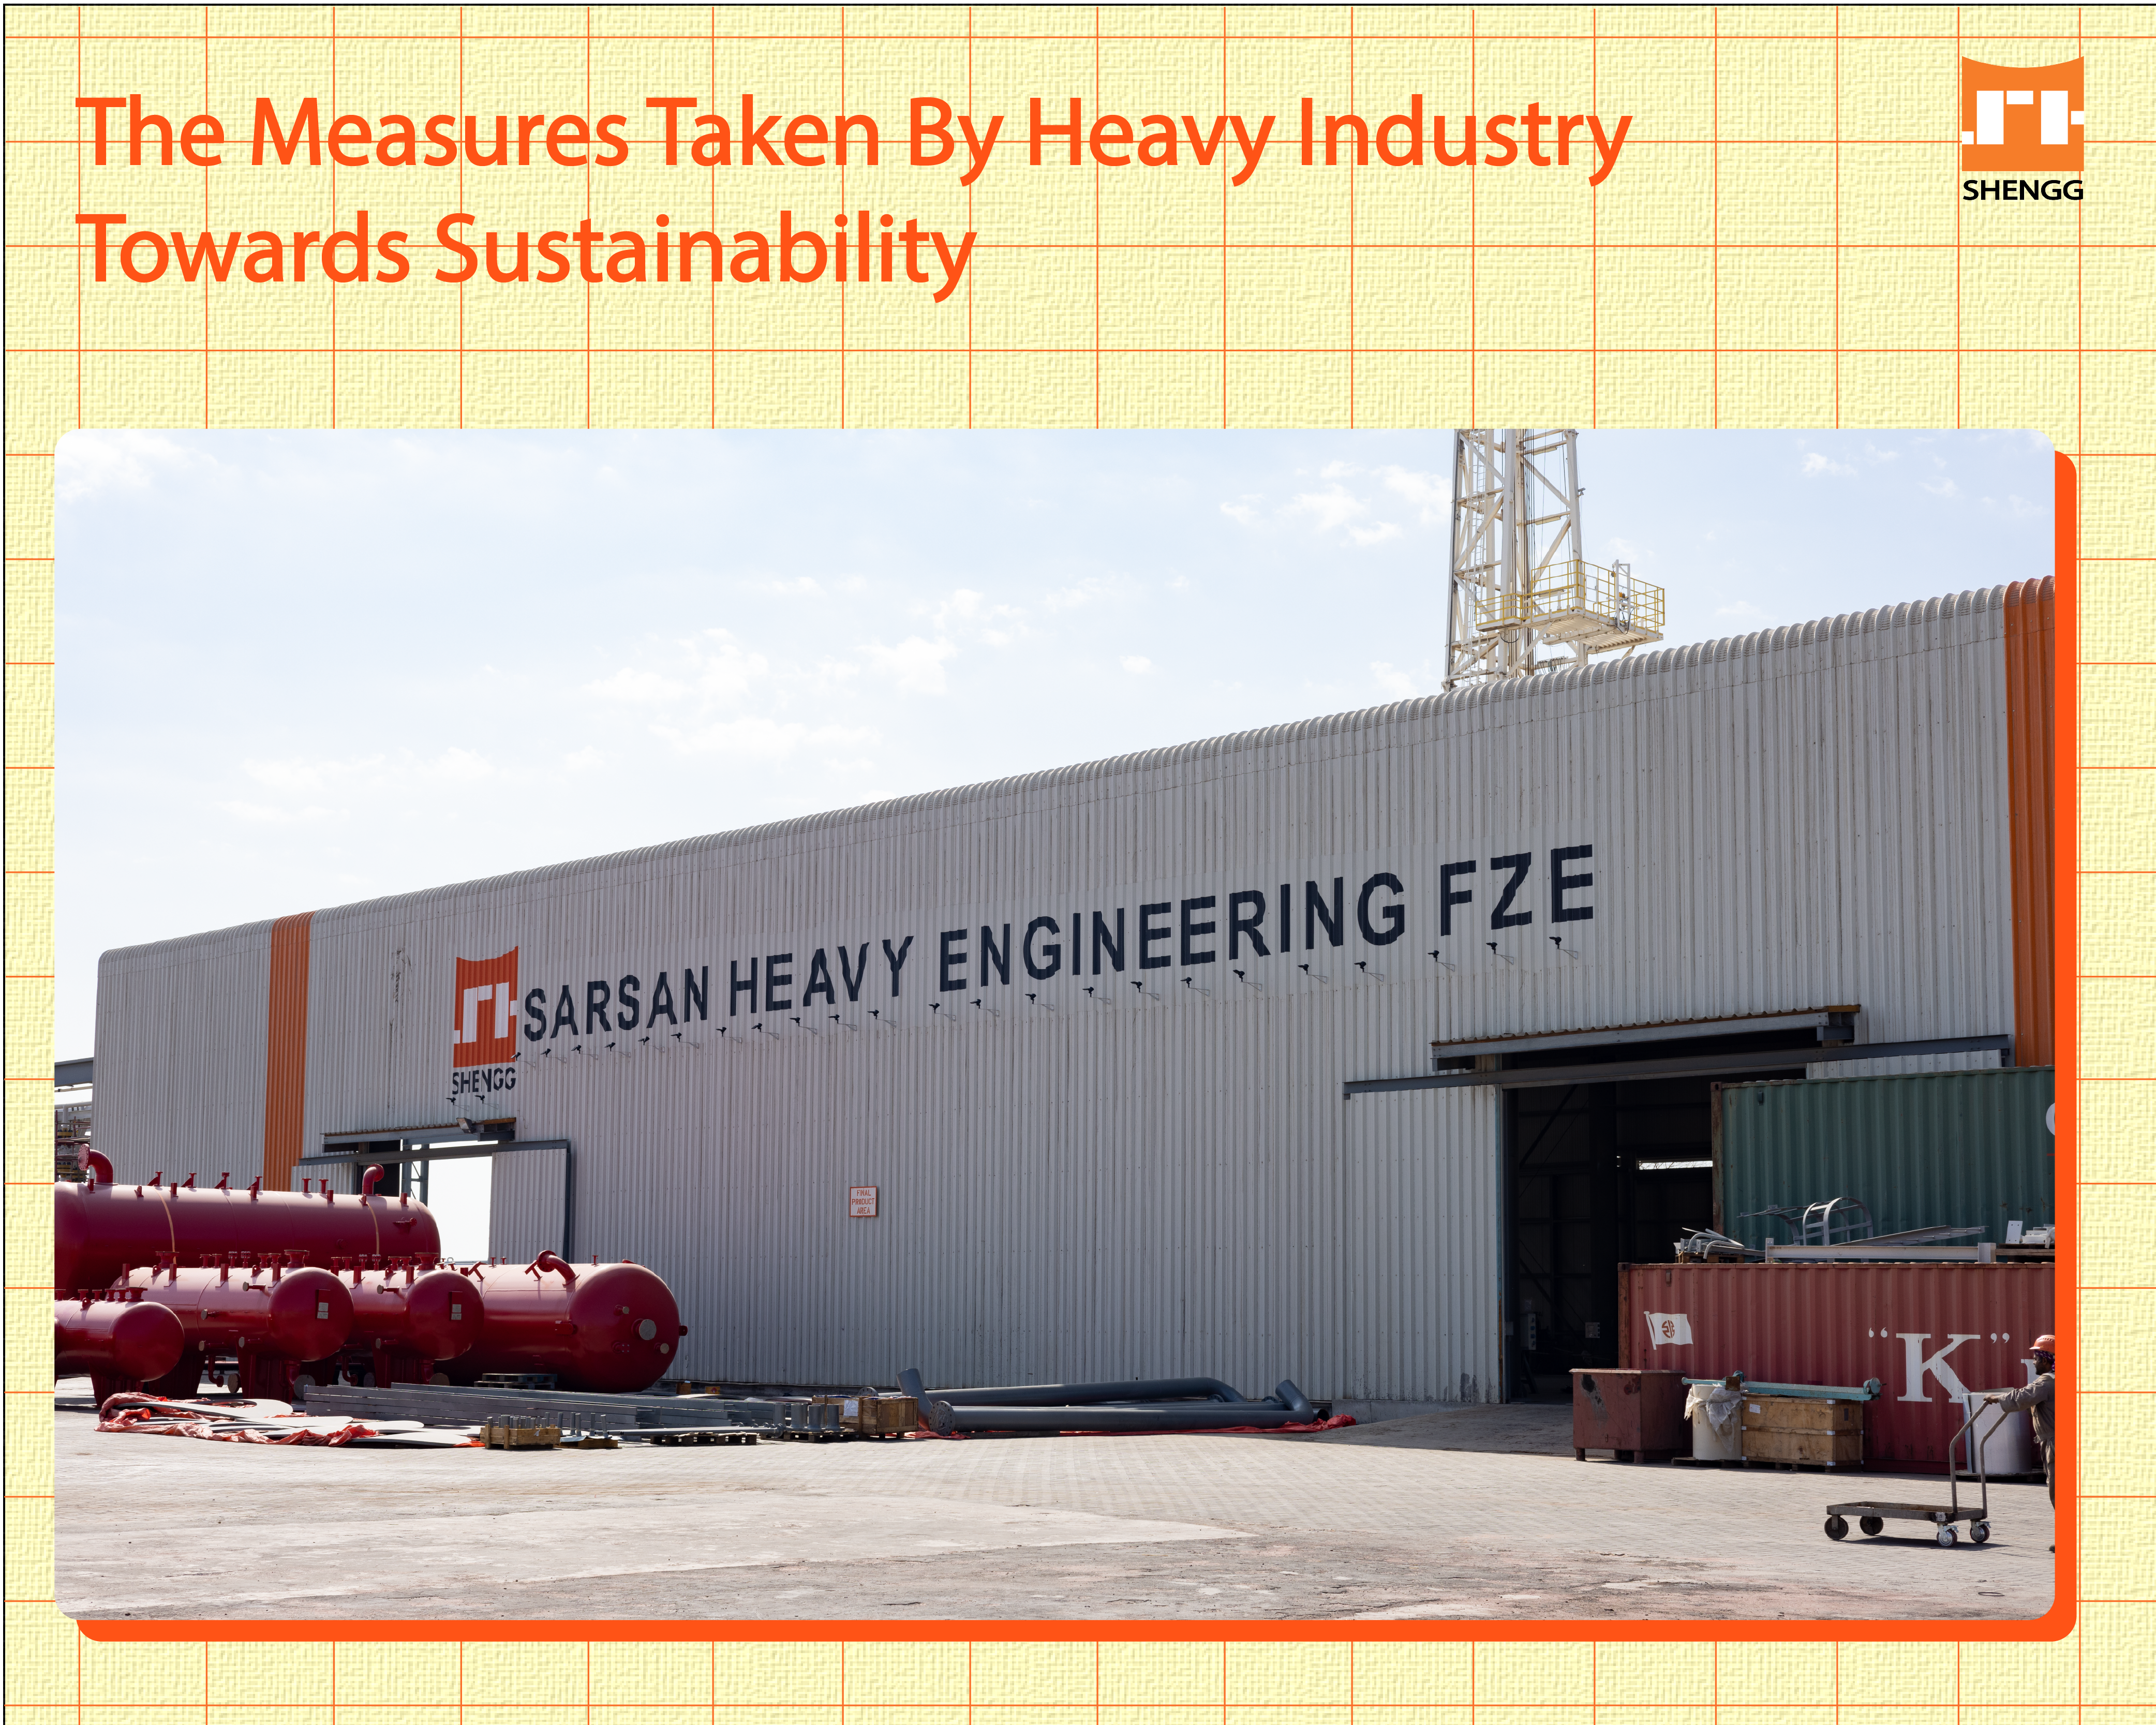 The measures taken by heavy industry towards sustainability